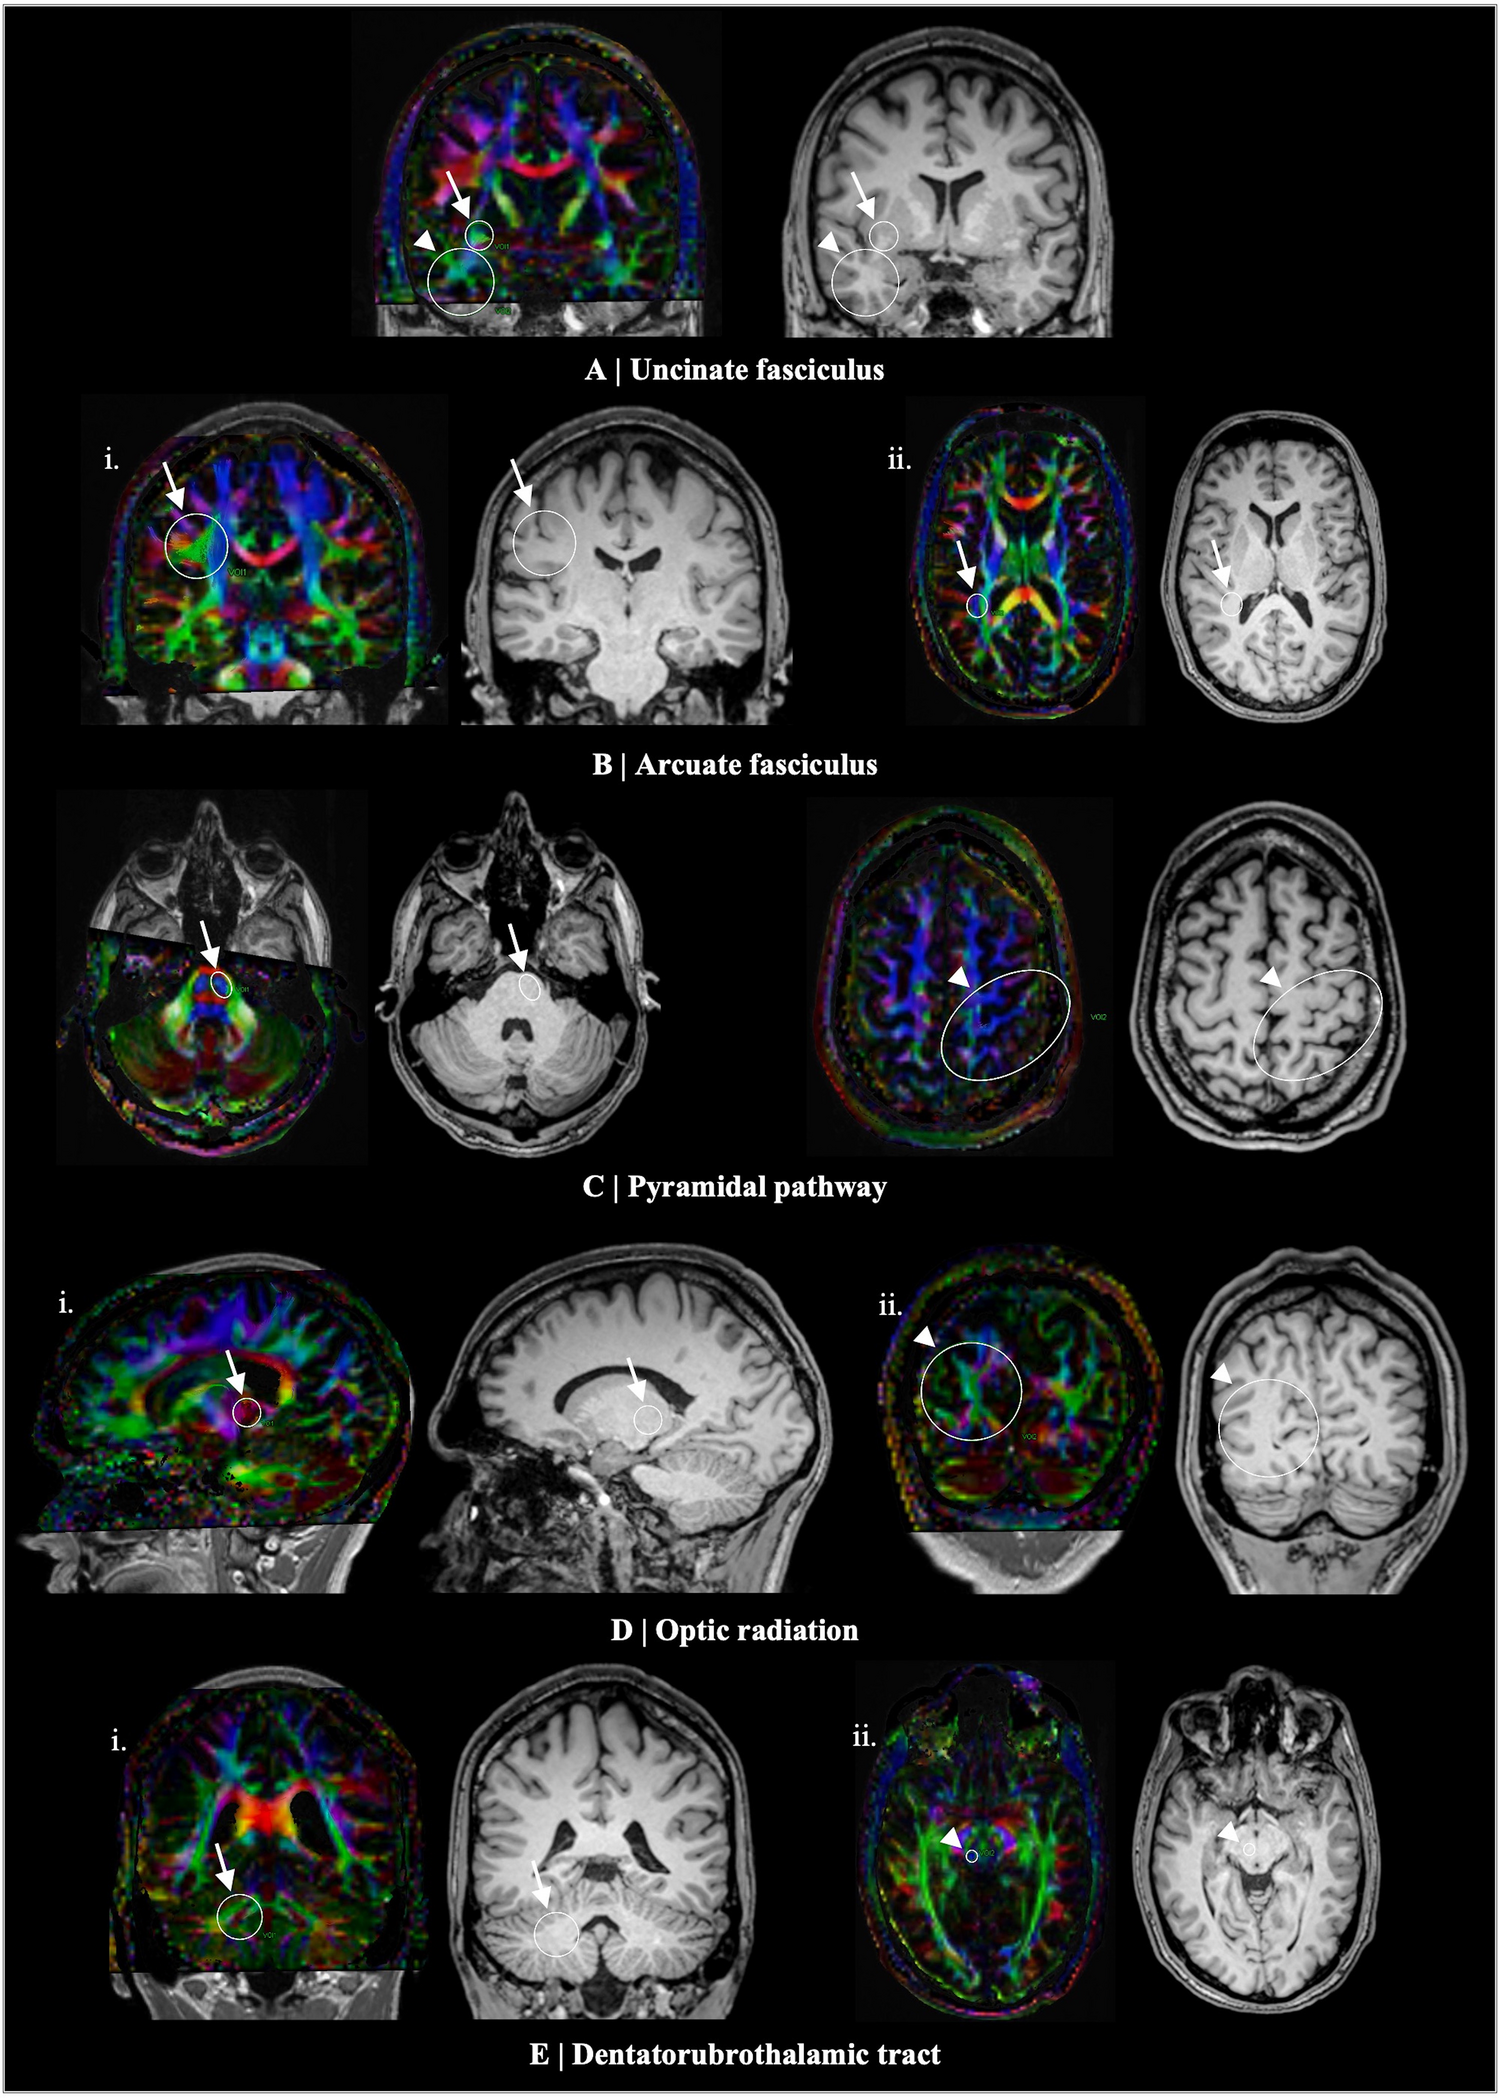 From images to insights: a neuroradiologist’s practical guide on white matter fiber tract anatomy and DTI patterns for pre-surgical planning